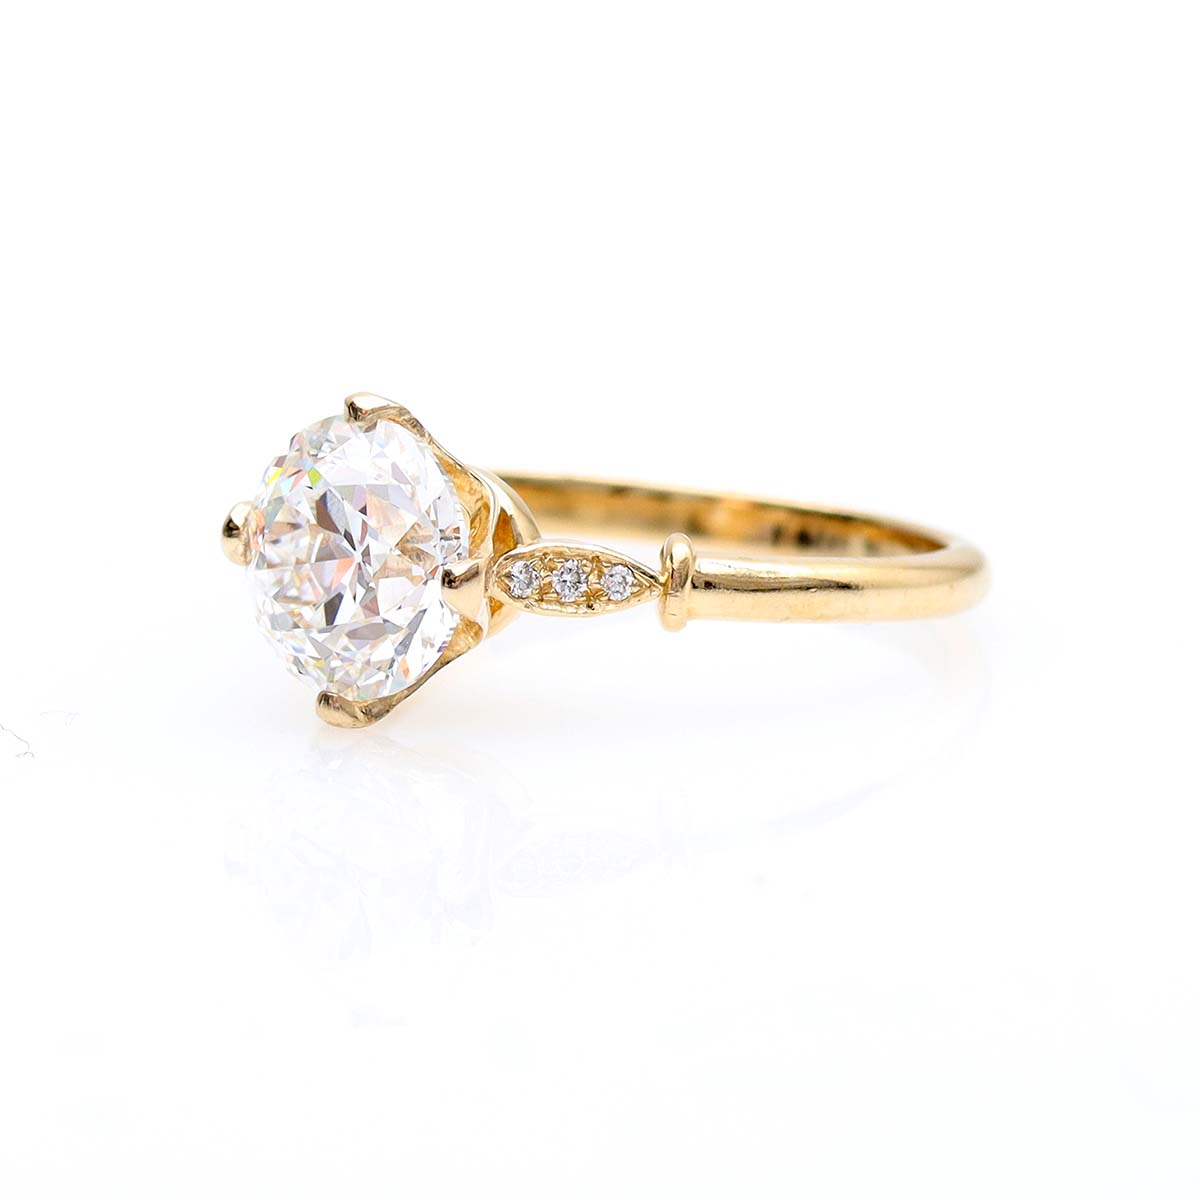 The Zoe Edwardian Inspired Old European Cut Engagement Ring #3606-4